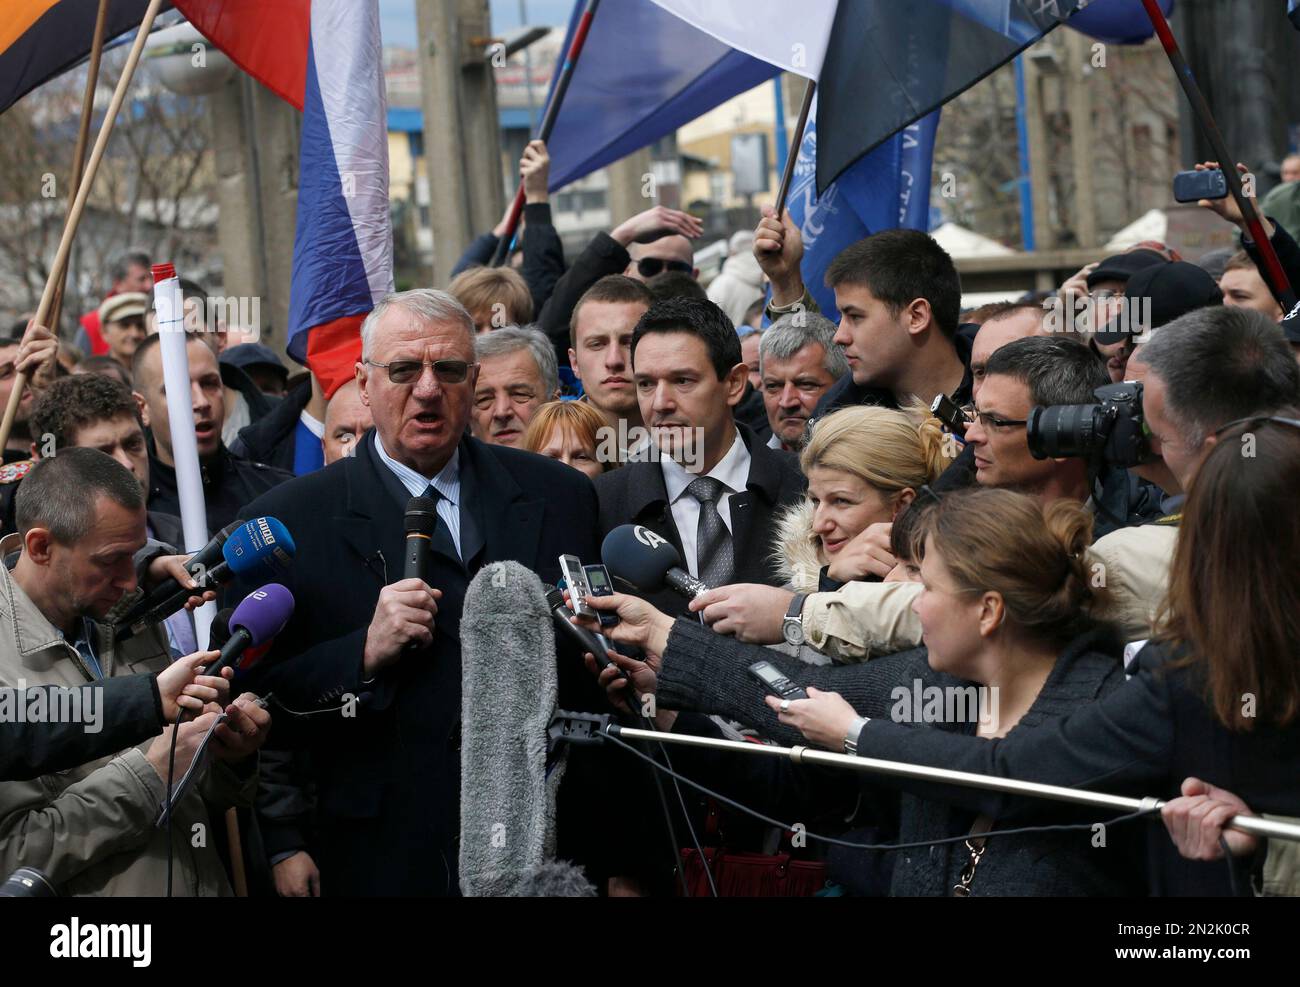 Serbian far right leader Vojislav Seselj, who is accused of war crimes by a U.N. court, addresses the media at a protest in front of the Higher Court in Belgrade, Serbia, Wednesday, April 1, 2015. Serbia's Foreign Minister Ivica Dacic on Tuesday denounced a Hague Tribunal ruling that far-right leader Vojislav Seselj must return to the court's prison. (AP Photo/Darko Vojinovic) Stockfoto